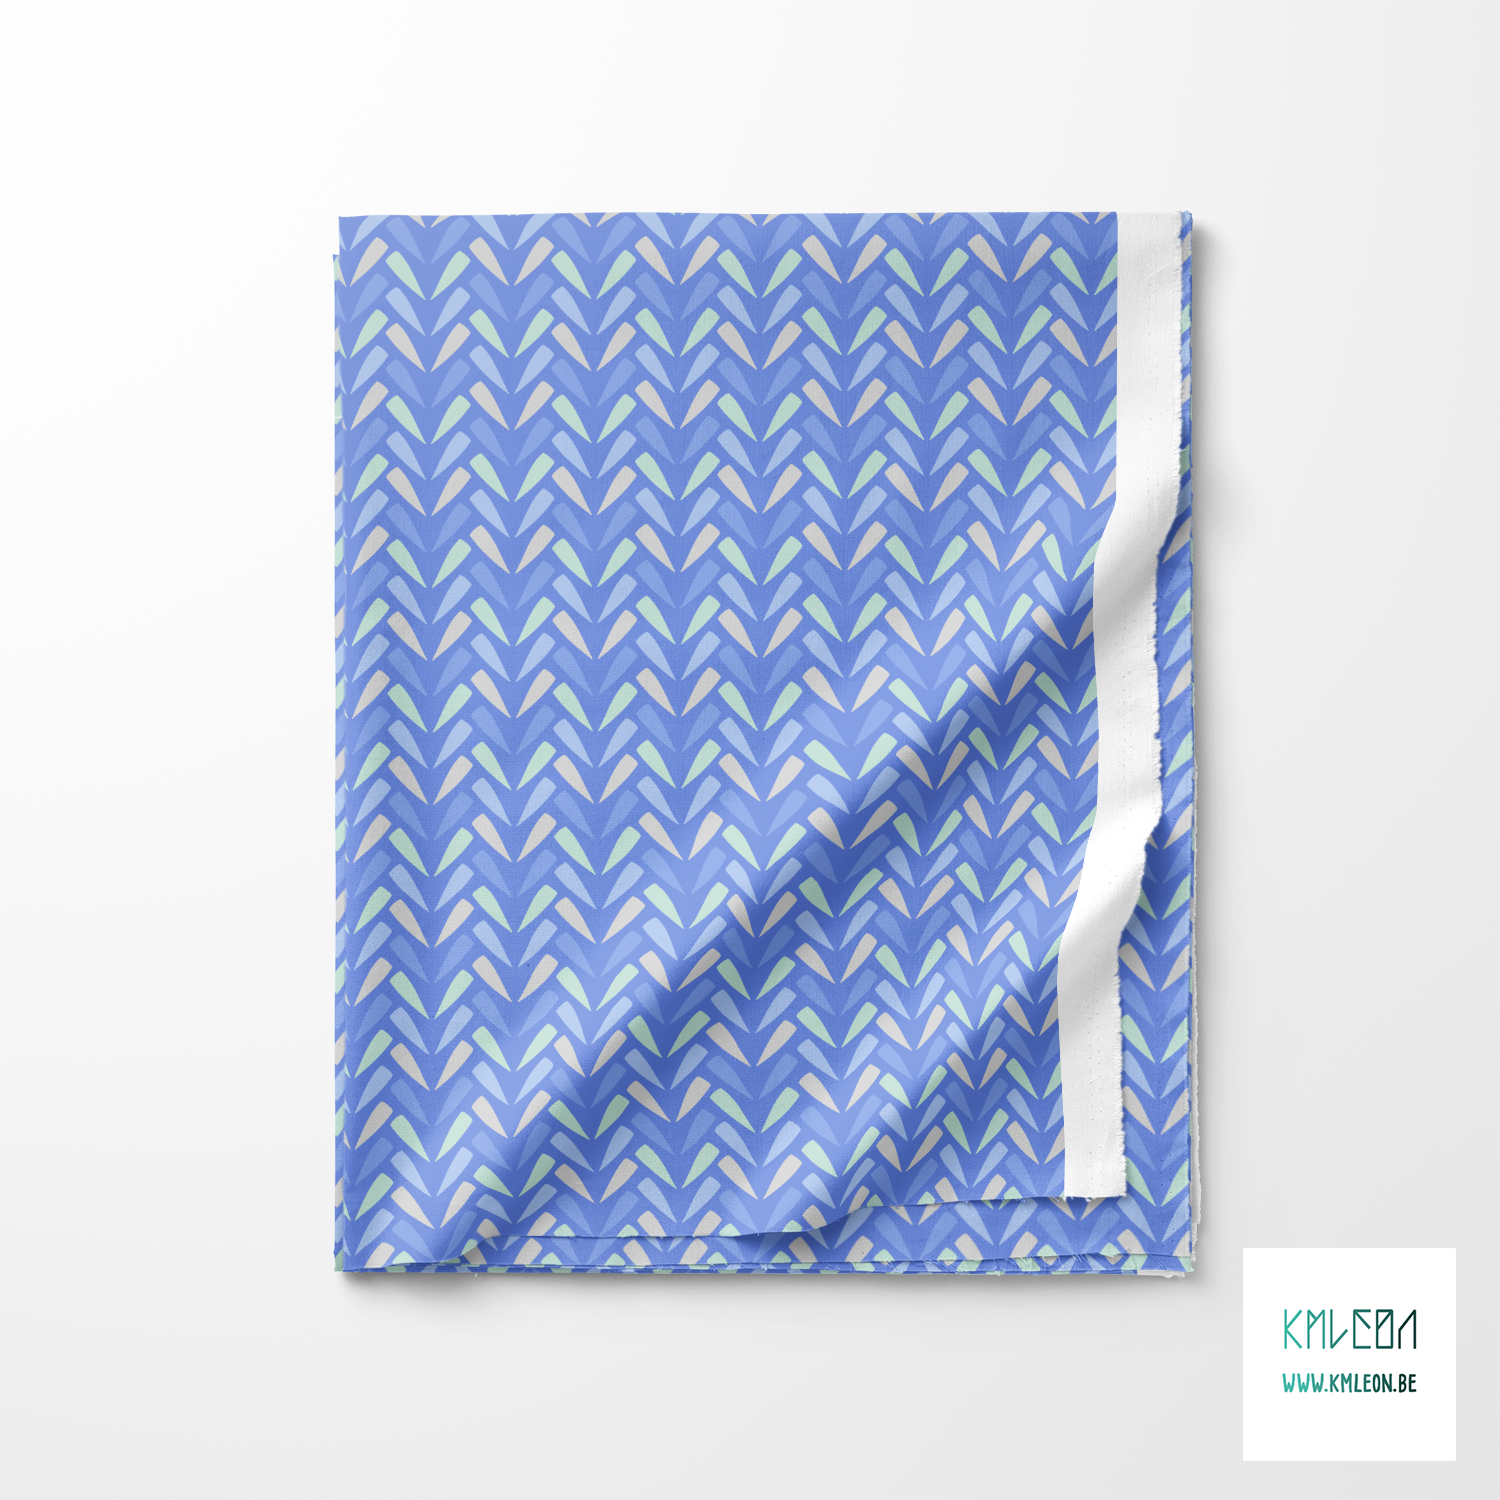 Mint green, grey and periwinkle chevron fabric